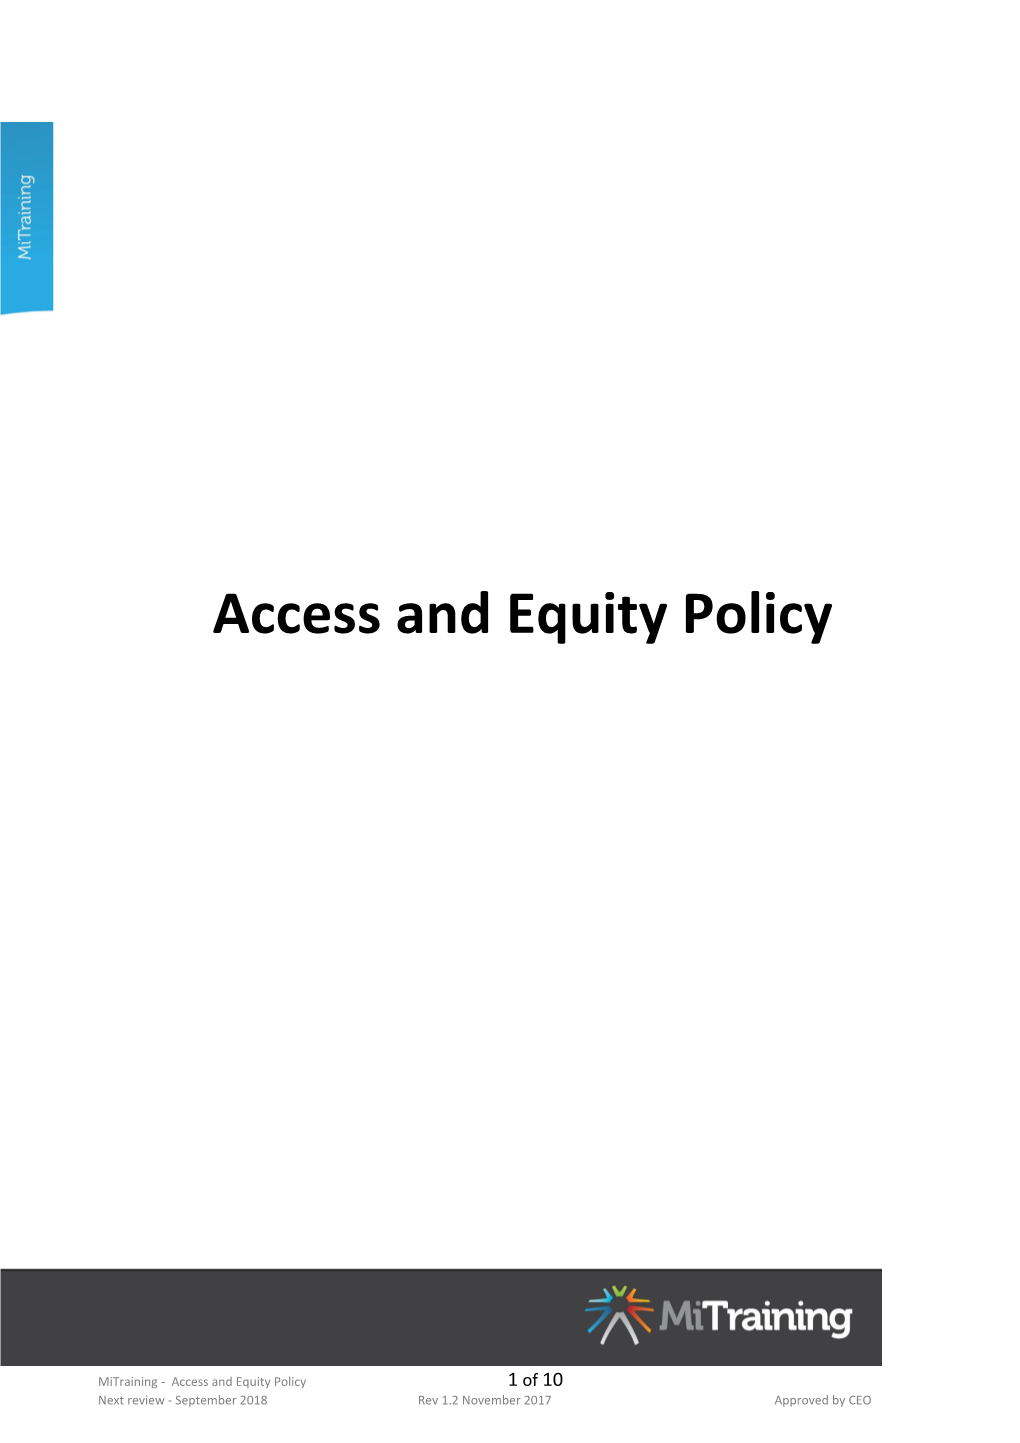 Access and Equity Policy